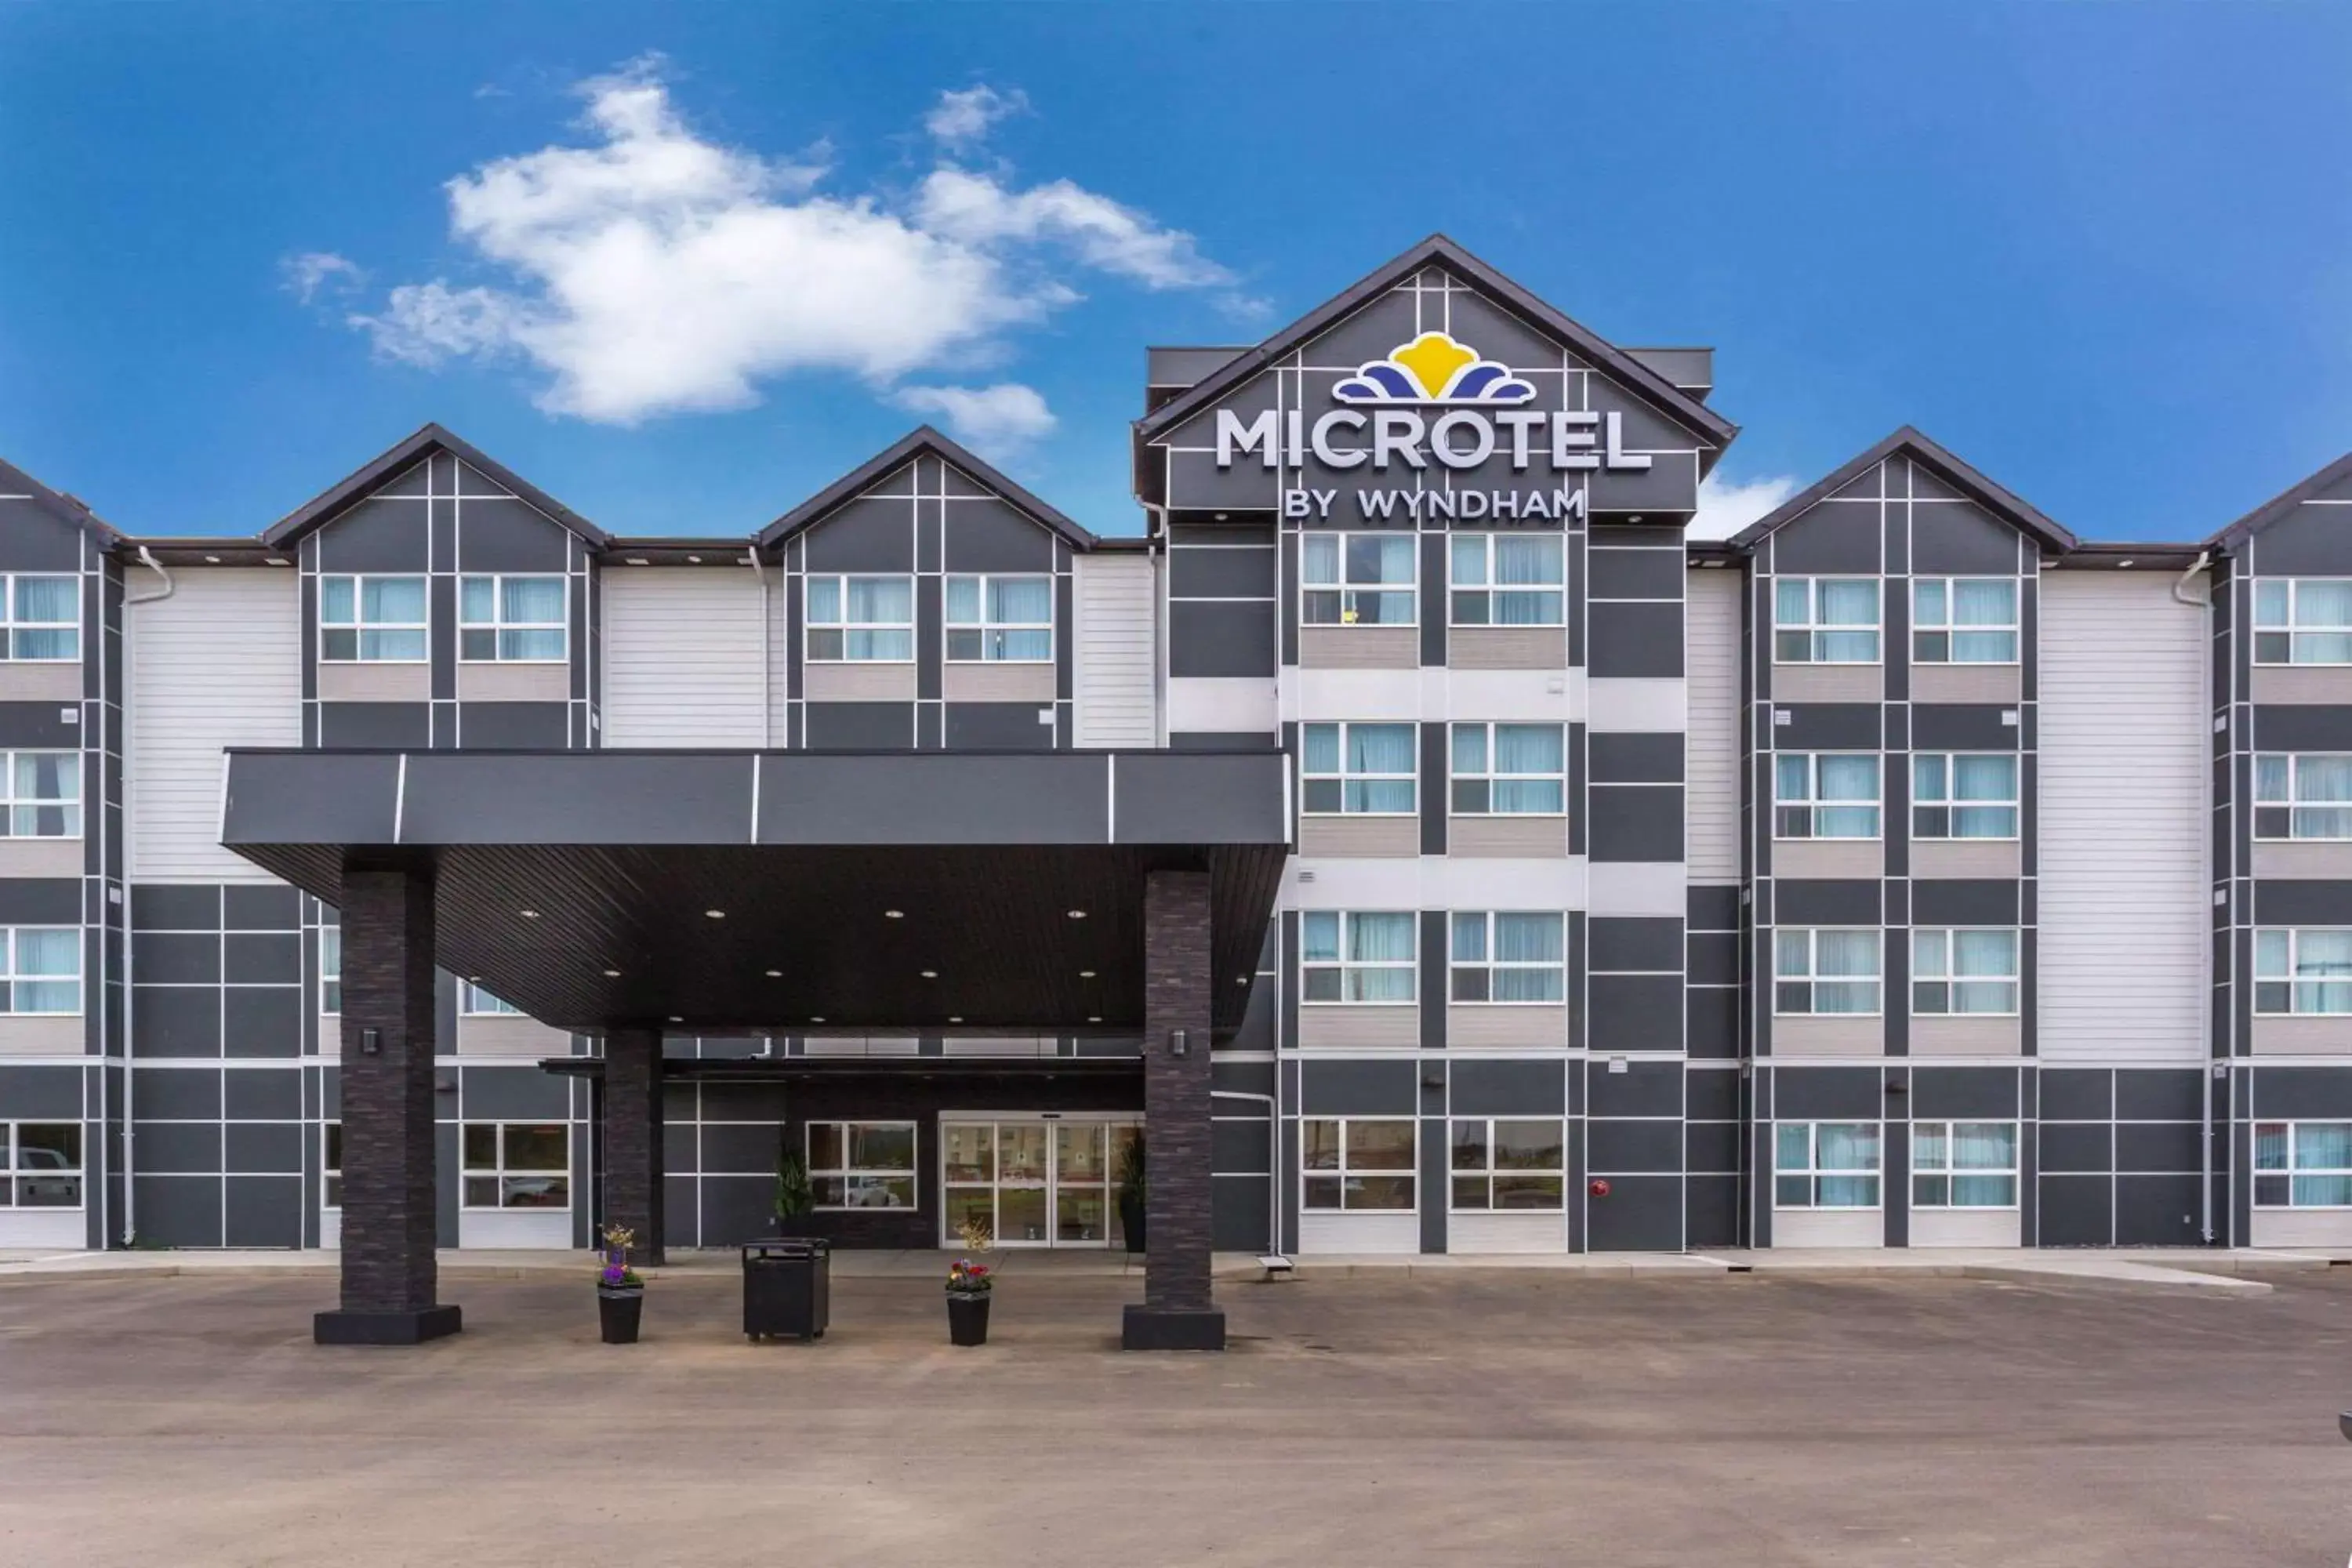 Property Building in Microtel Inn & Suites by Wyndham Whitecourt